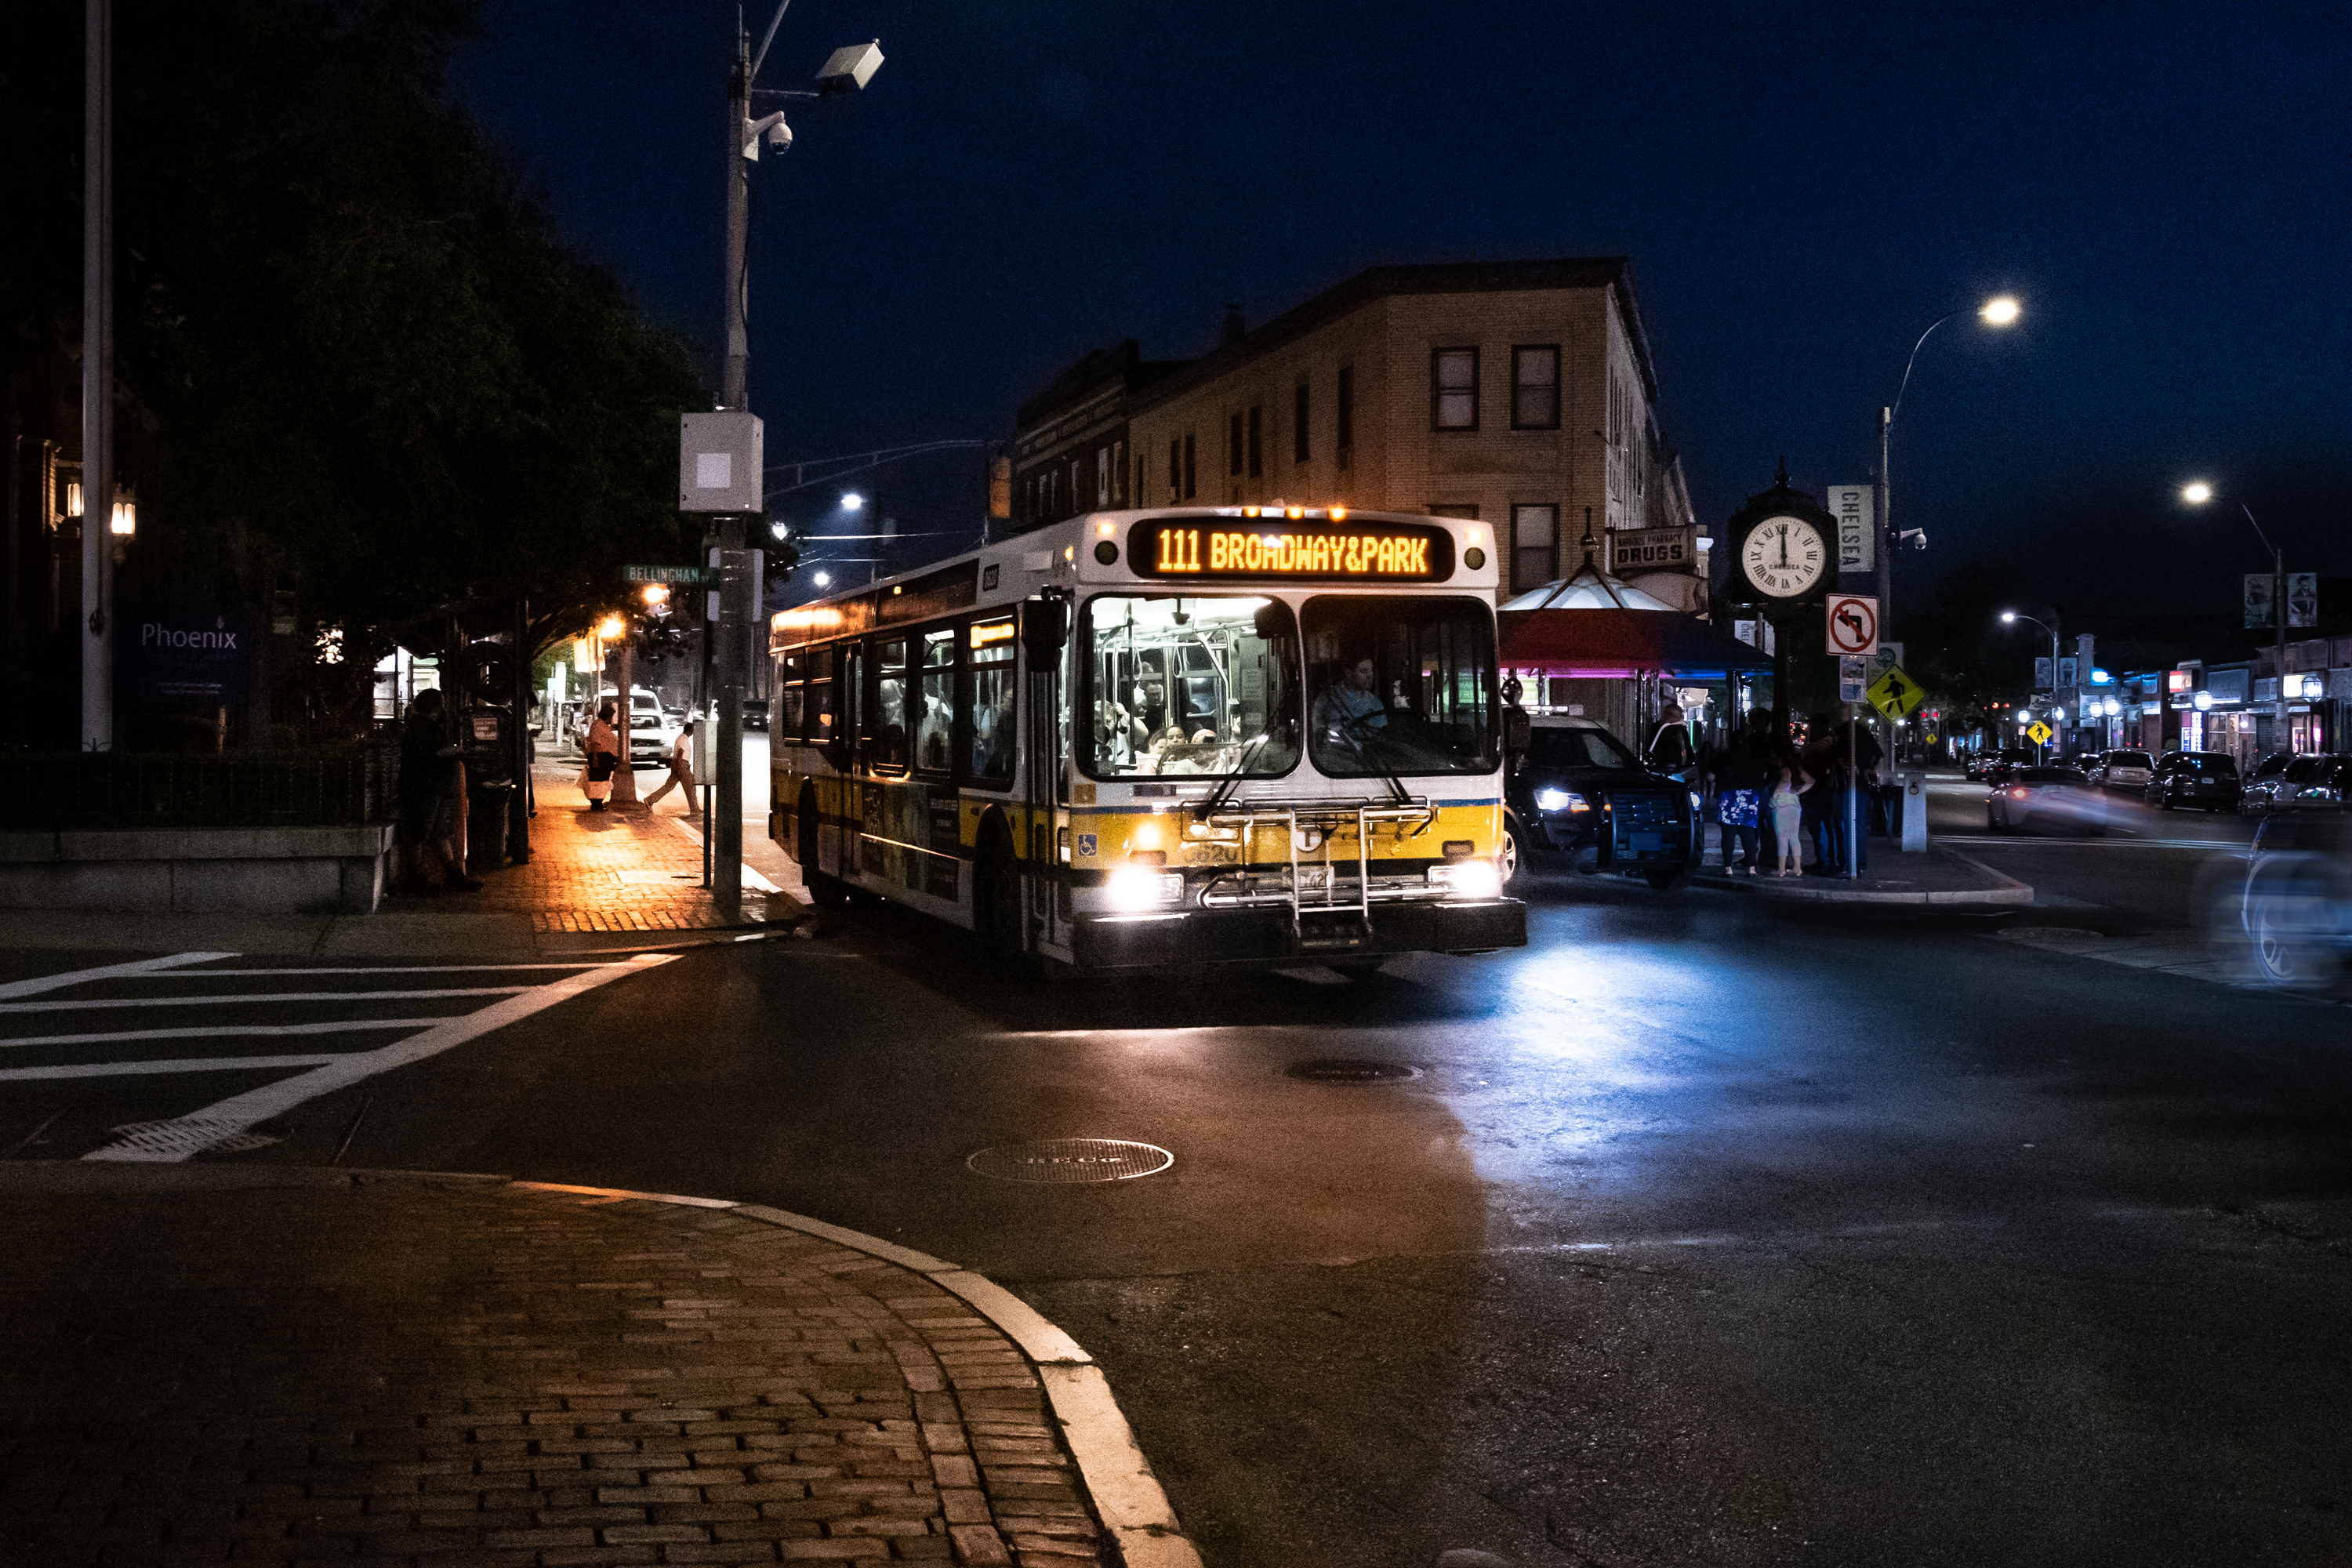 Overnight bus service on the 111 in Chelsea